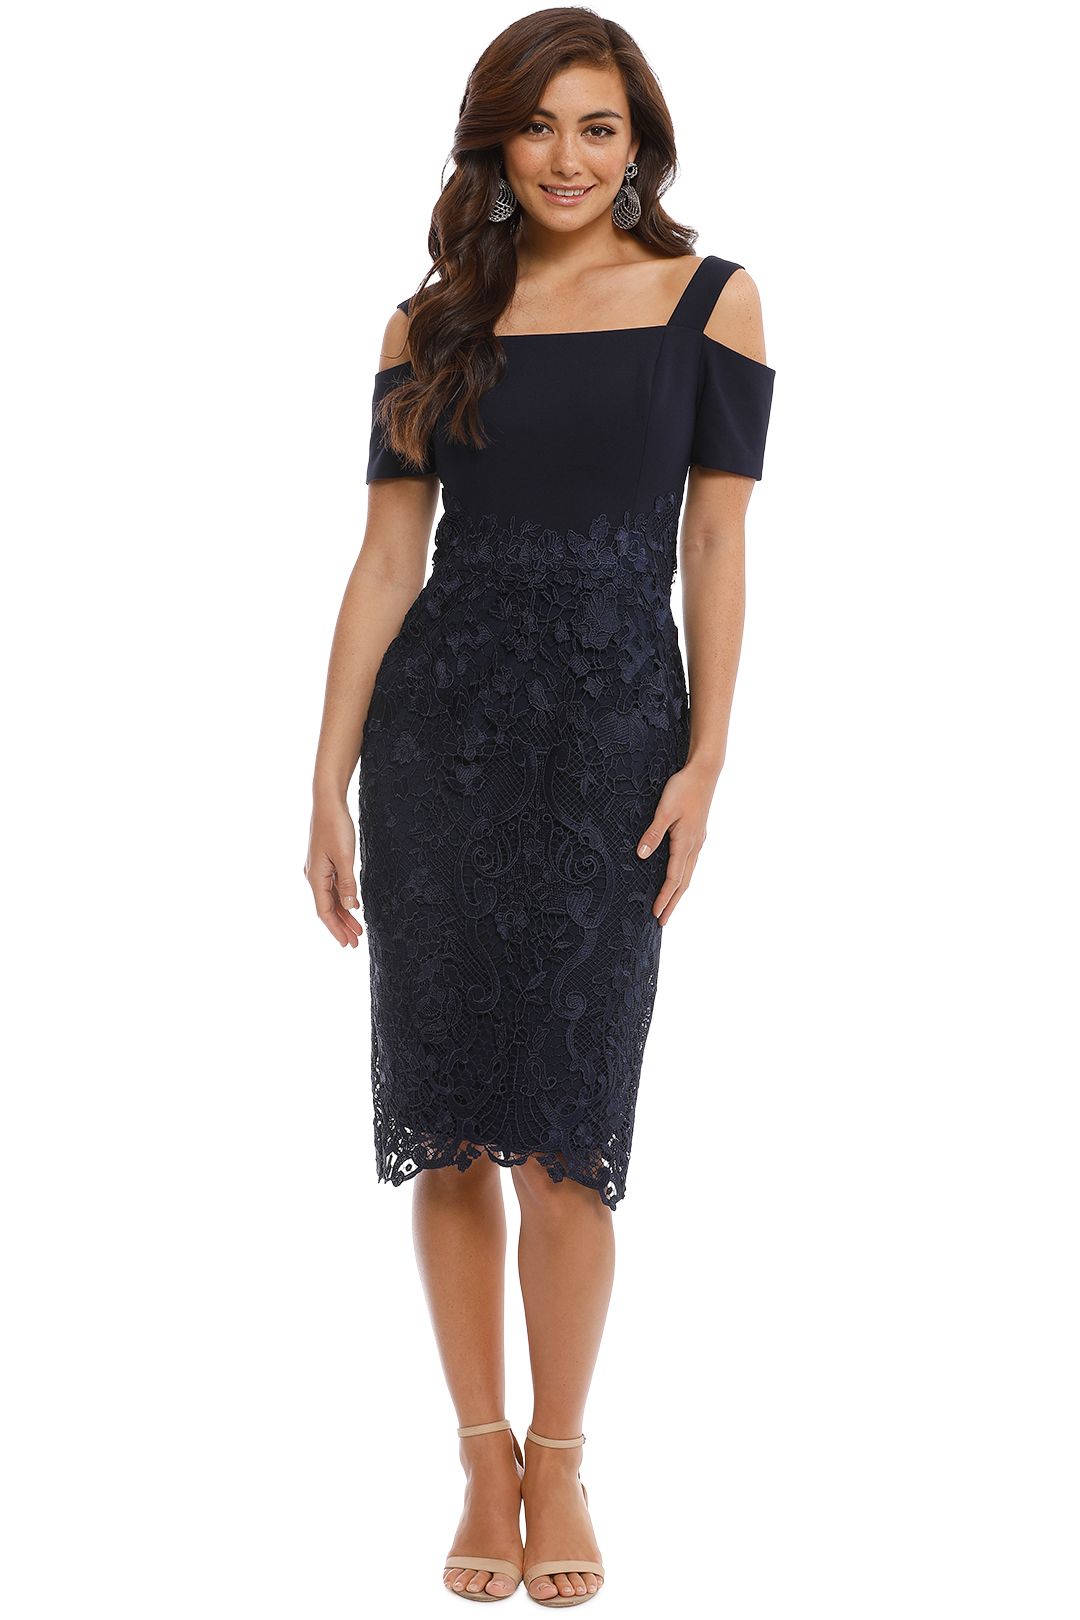 Grace and Hart - Breathless Love Midi - Navy - Front